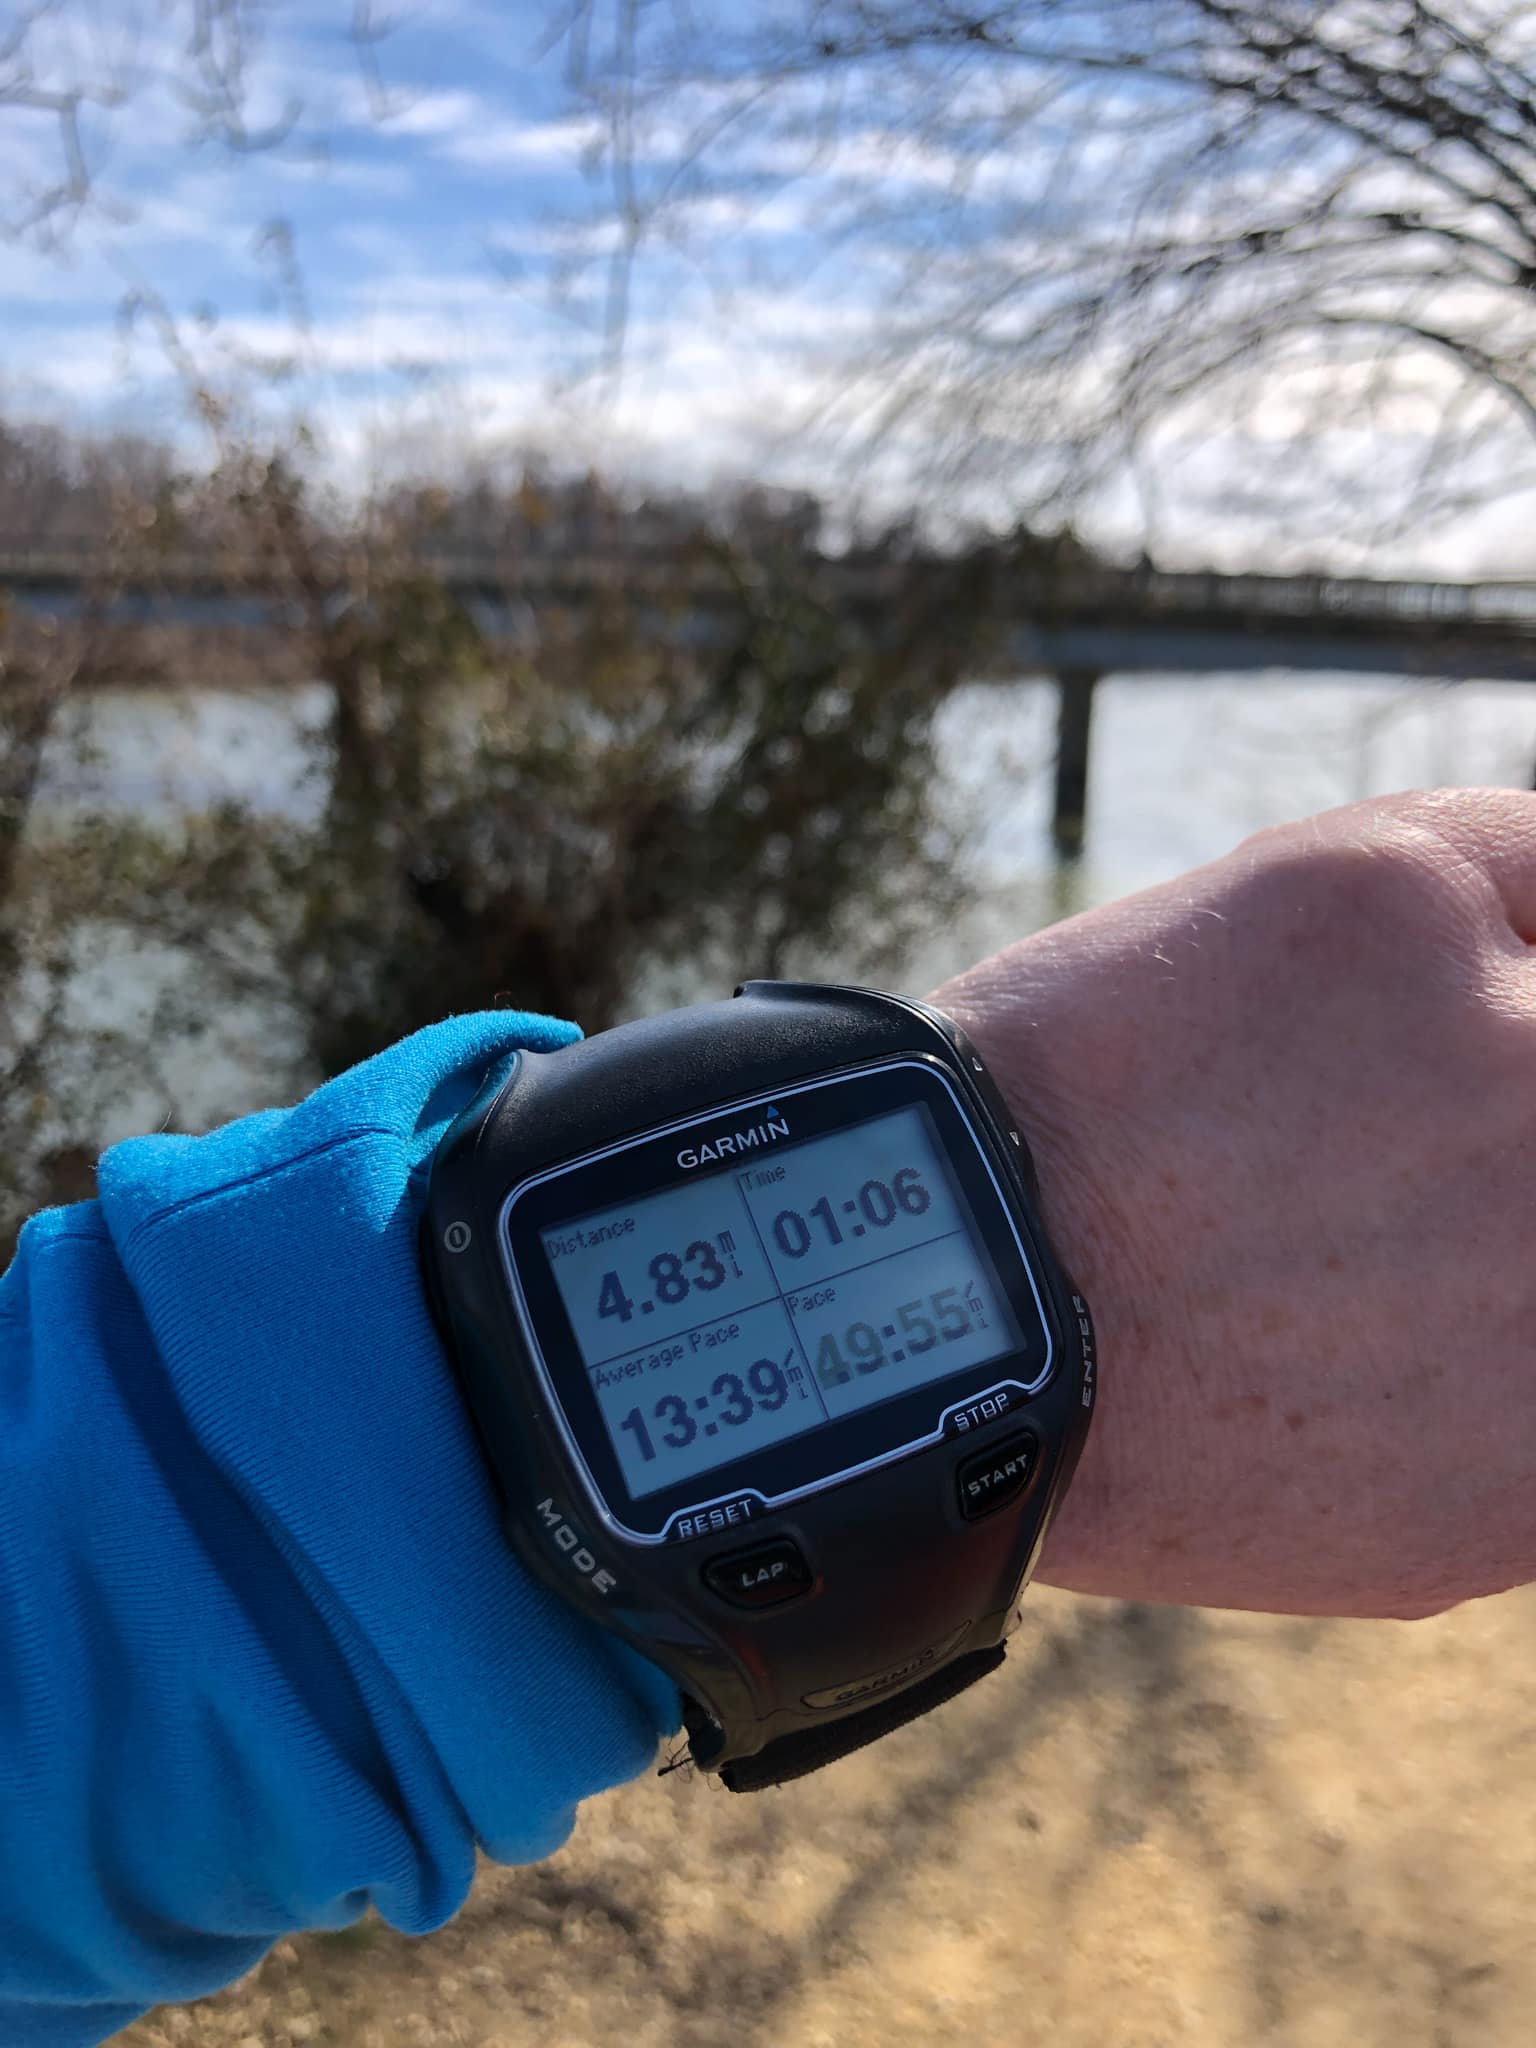 picture of garmin watch after a run